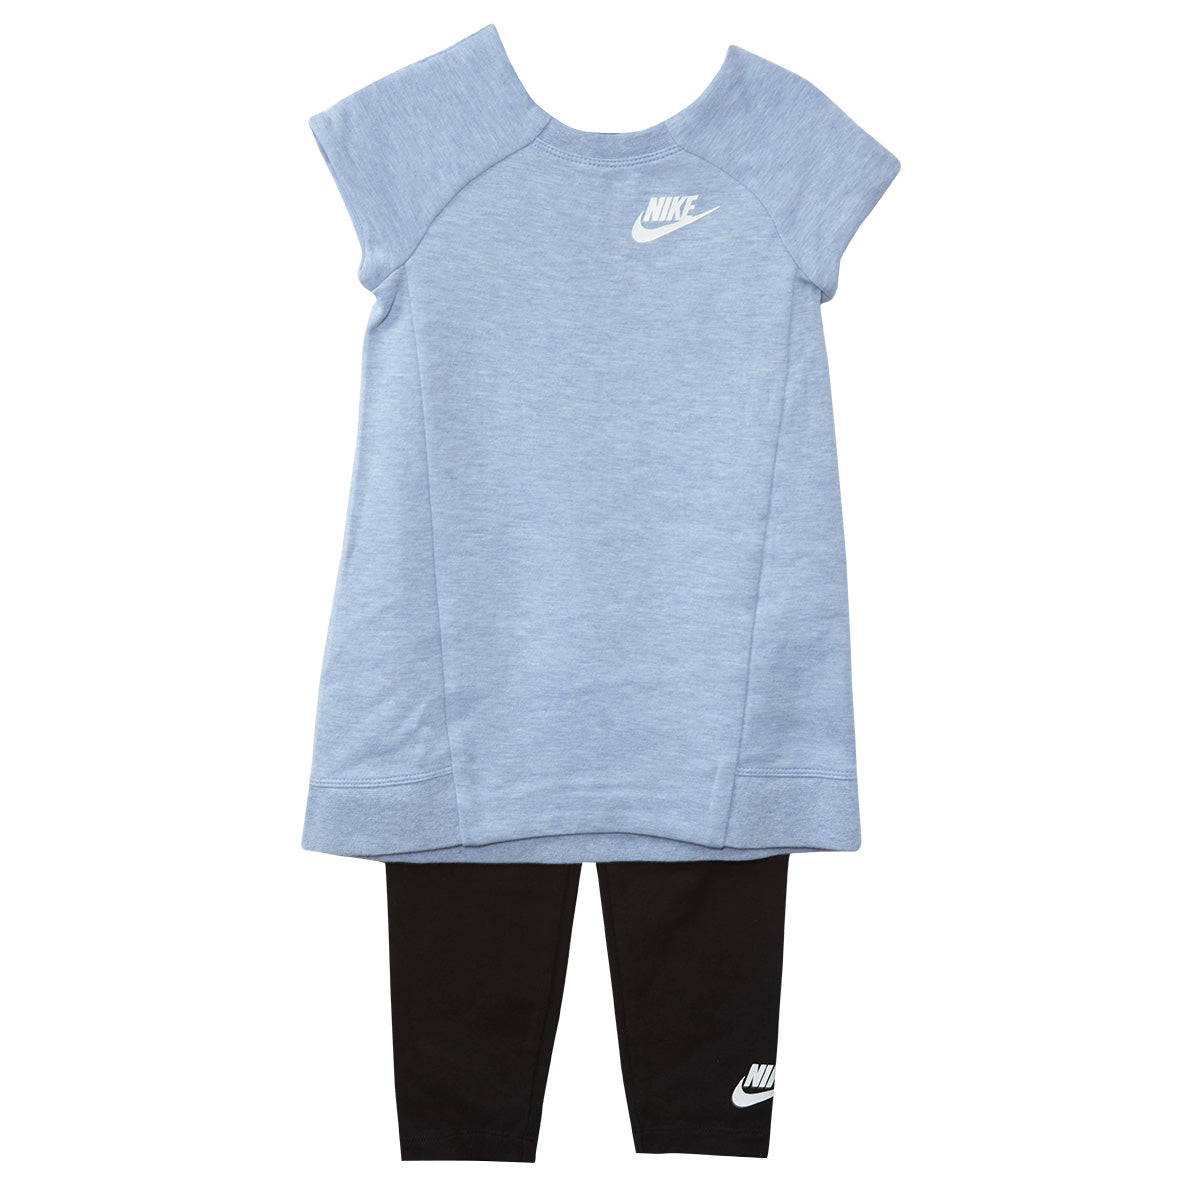 Nike 2 Piece Set Toddlers Style : 26c084